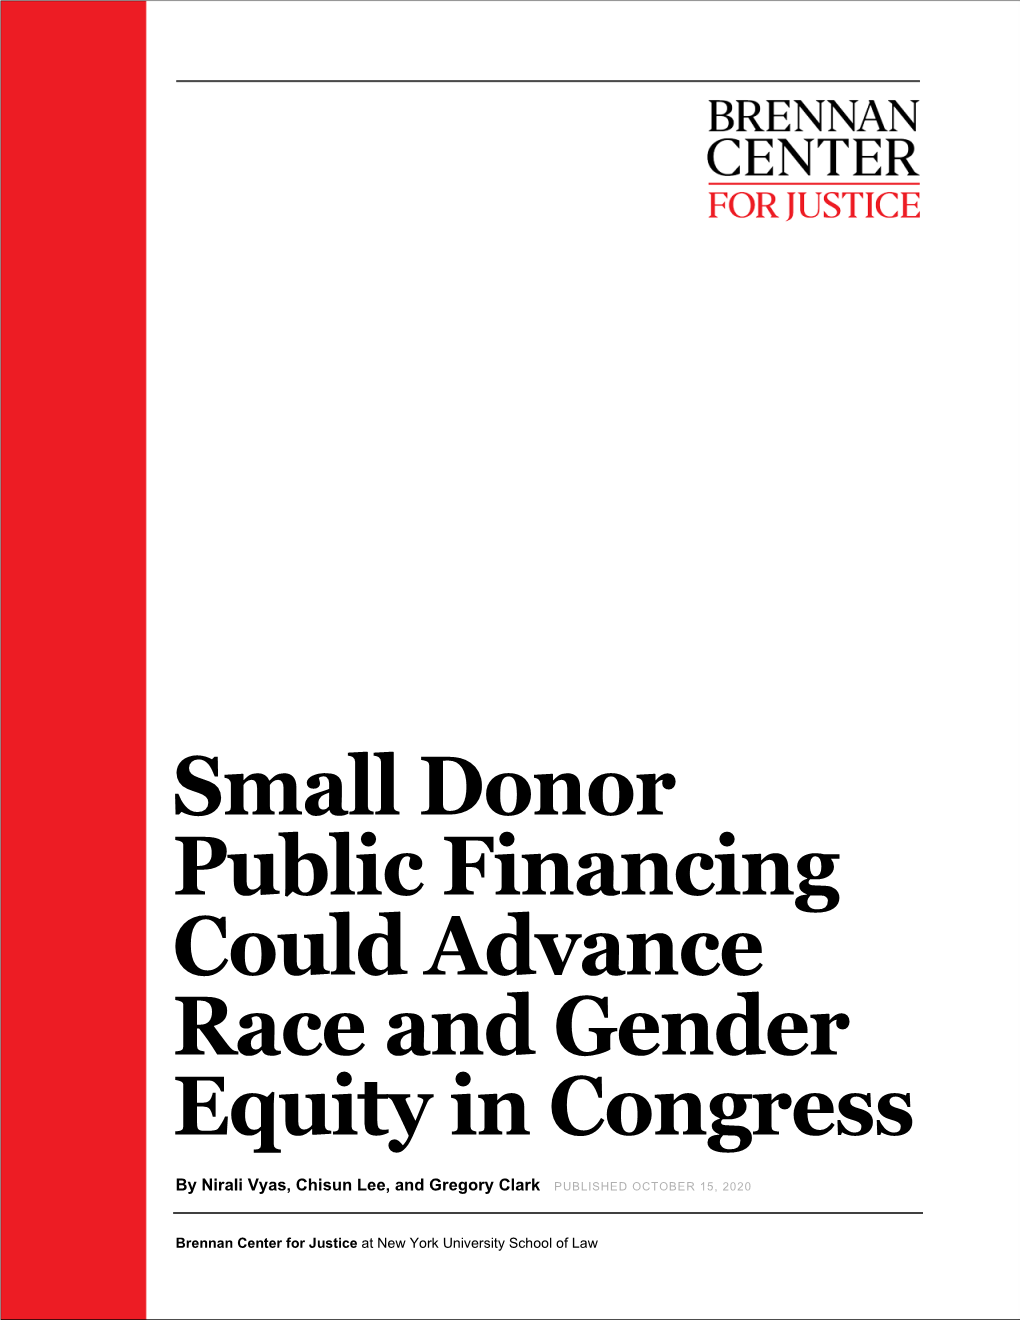 Small Donor Public Financing Could Advance Race and Gender Equity in Congress